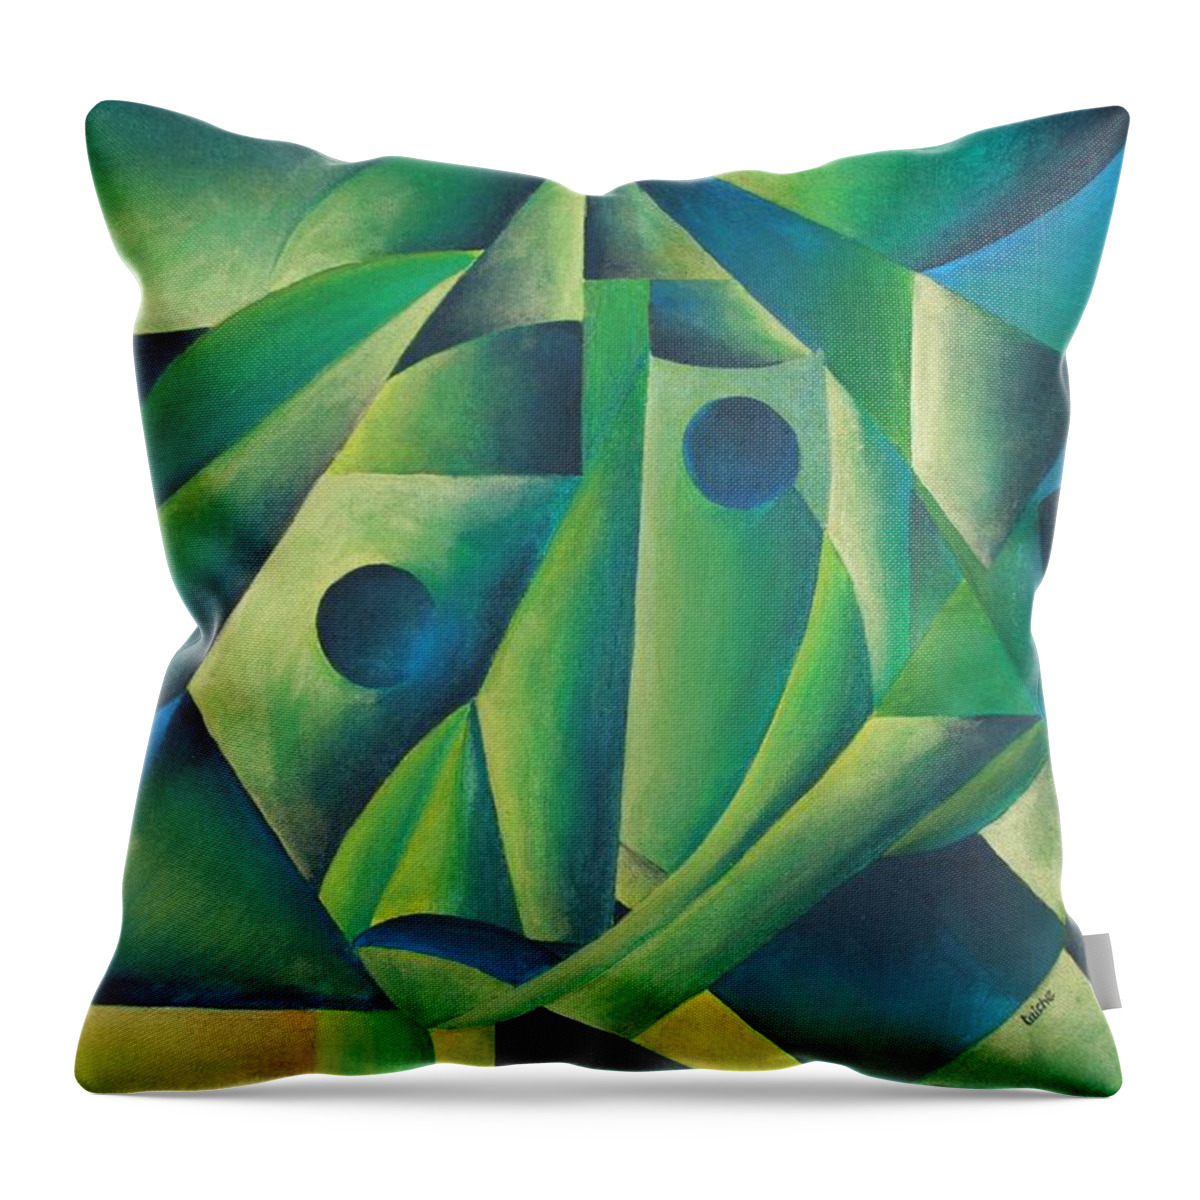 Abstract Throw Pillow featuring the painting Village Woman Wearing A Headscarf by Taiche Acrylic Art